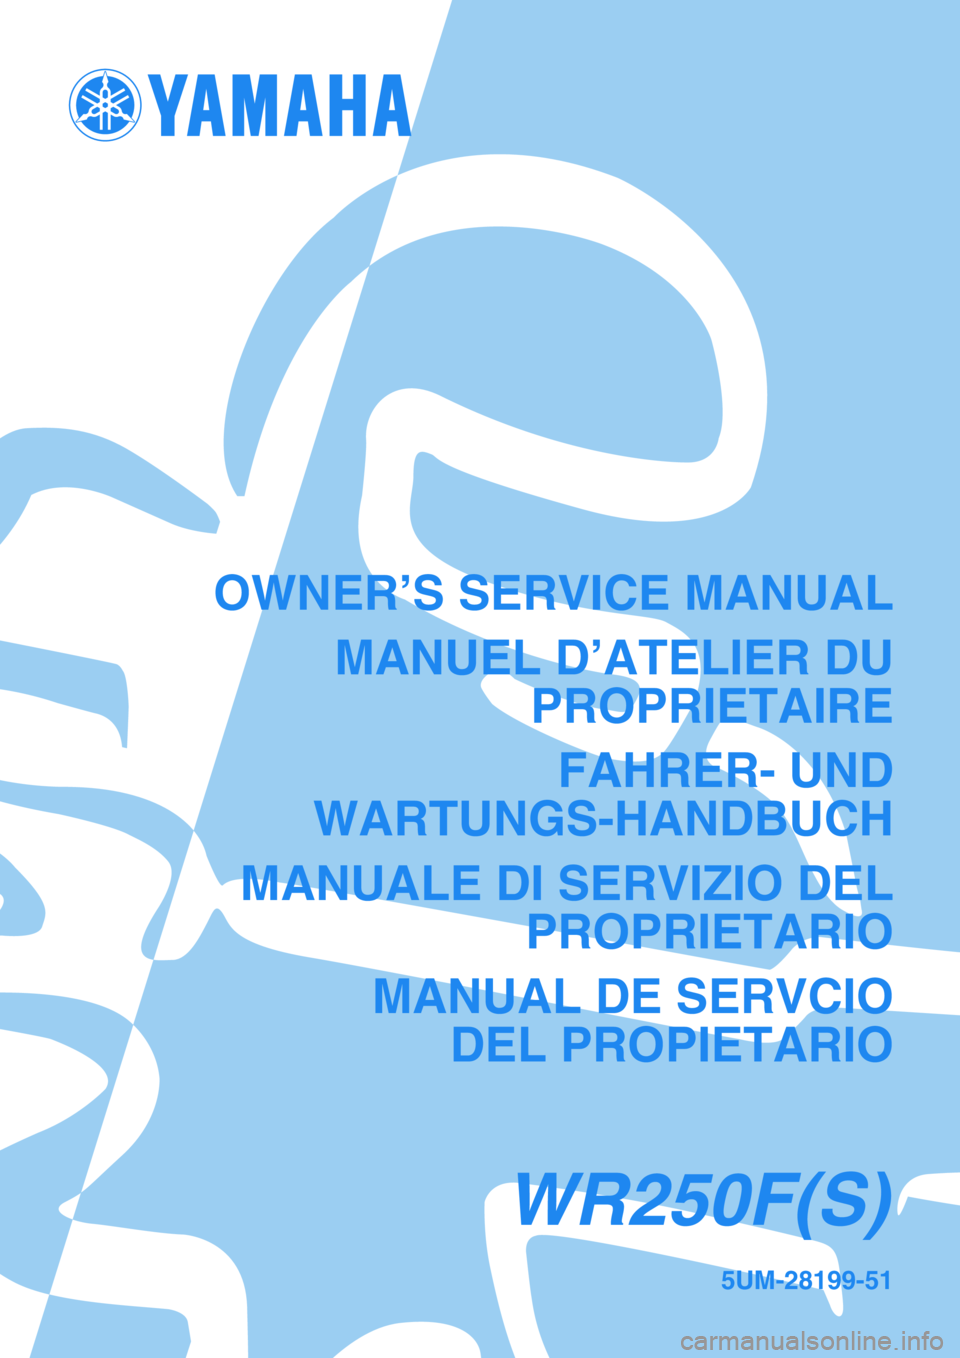 YAMAHA WR 250F 2004  Manuale duso (in Italian) 5UM-28199-51
WR250F(S)
OWNER’S SERVICE MANUAL
MANUEL D’ATELIER DU
PROPRIETAIRE
FAHRER- UND
WARTUNGS-HANDBUCH
MANUALE DI SERVIZIO DEL
PROPRIETARIO
MANUAL DE SERVCIO
DEL PROPIETARIO 